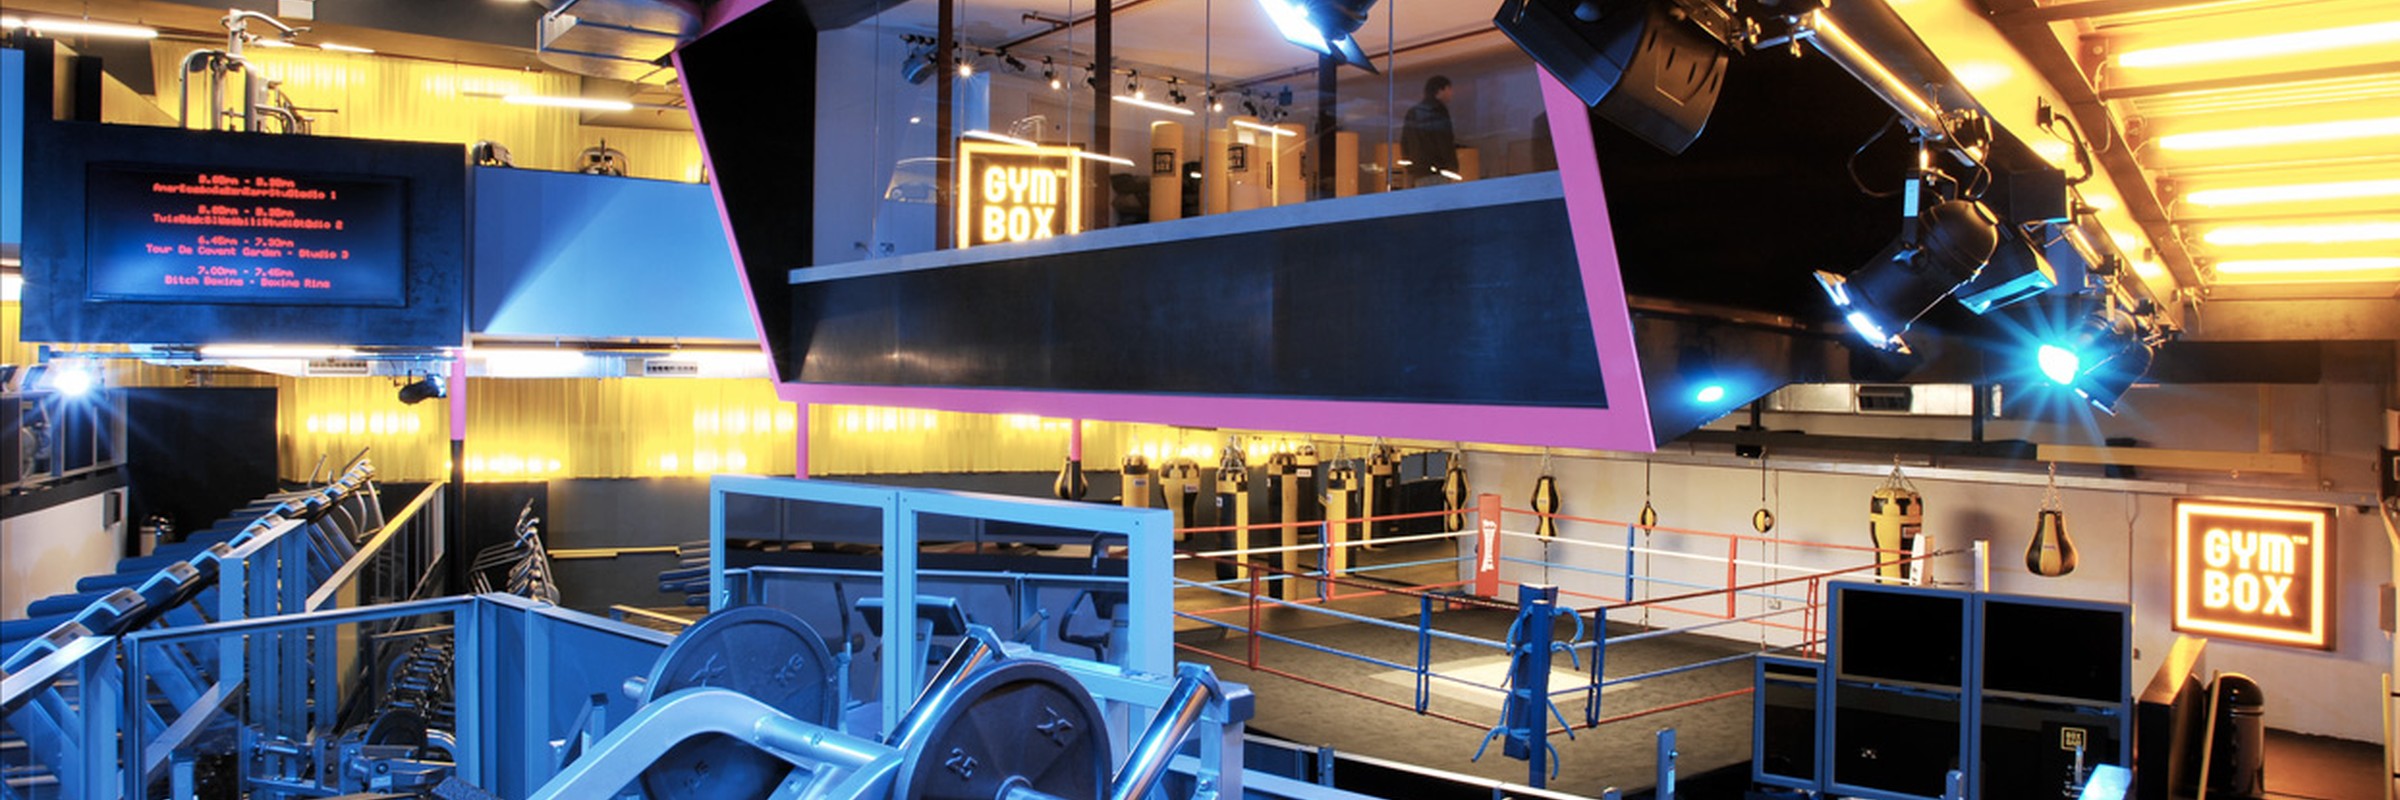 Gymbox, Covent Garden